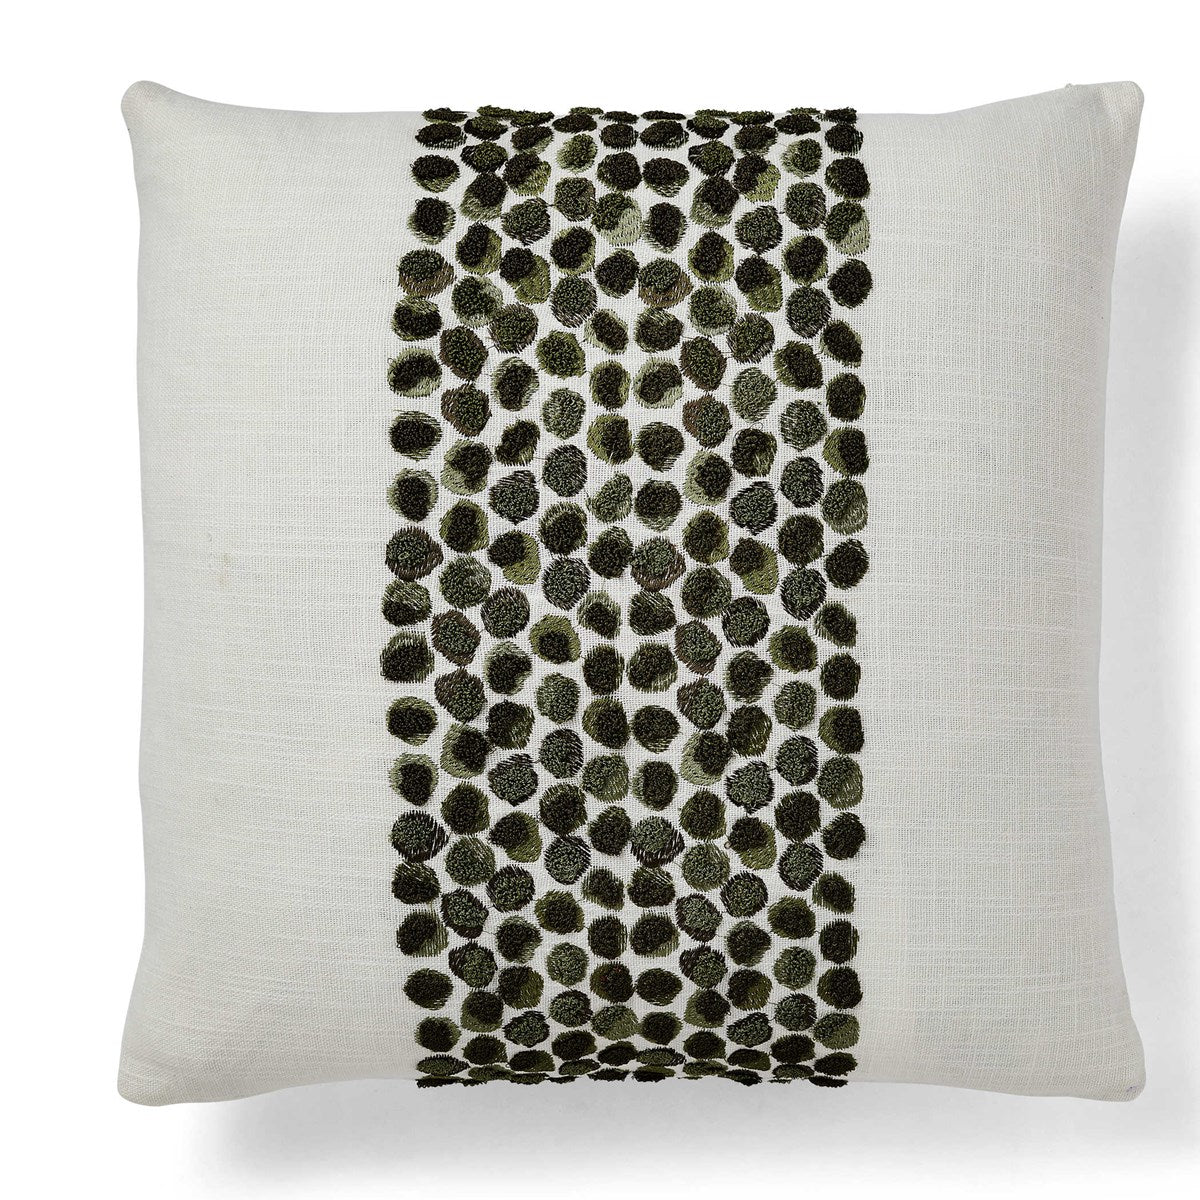 White pillow featuring boucle green spots in a center stripe.